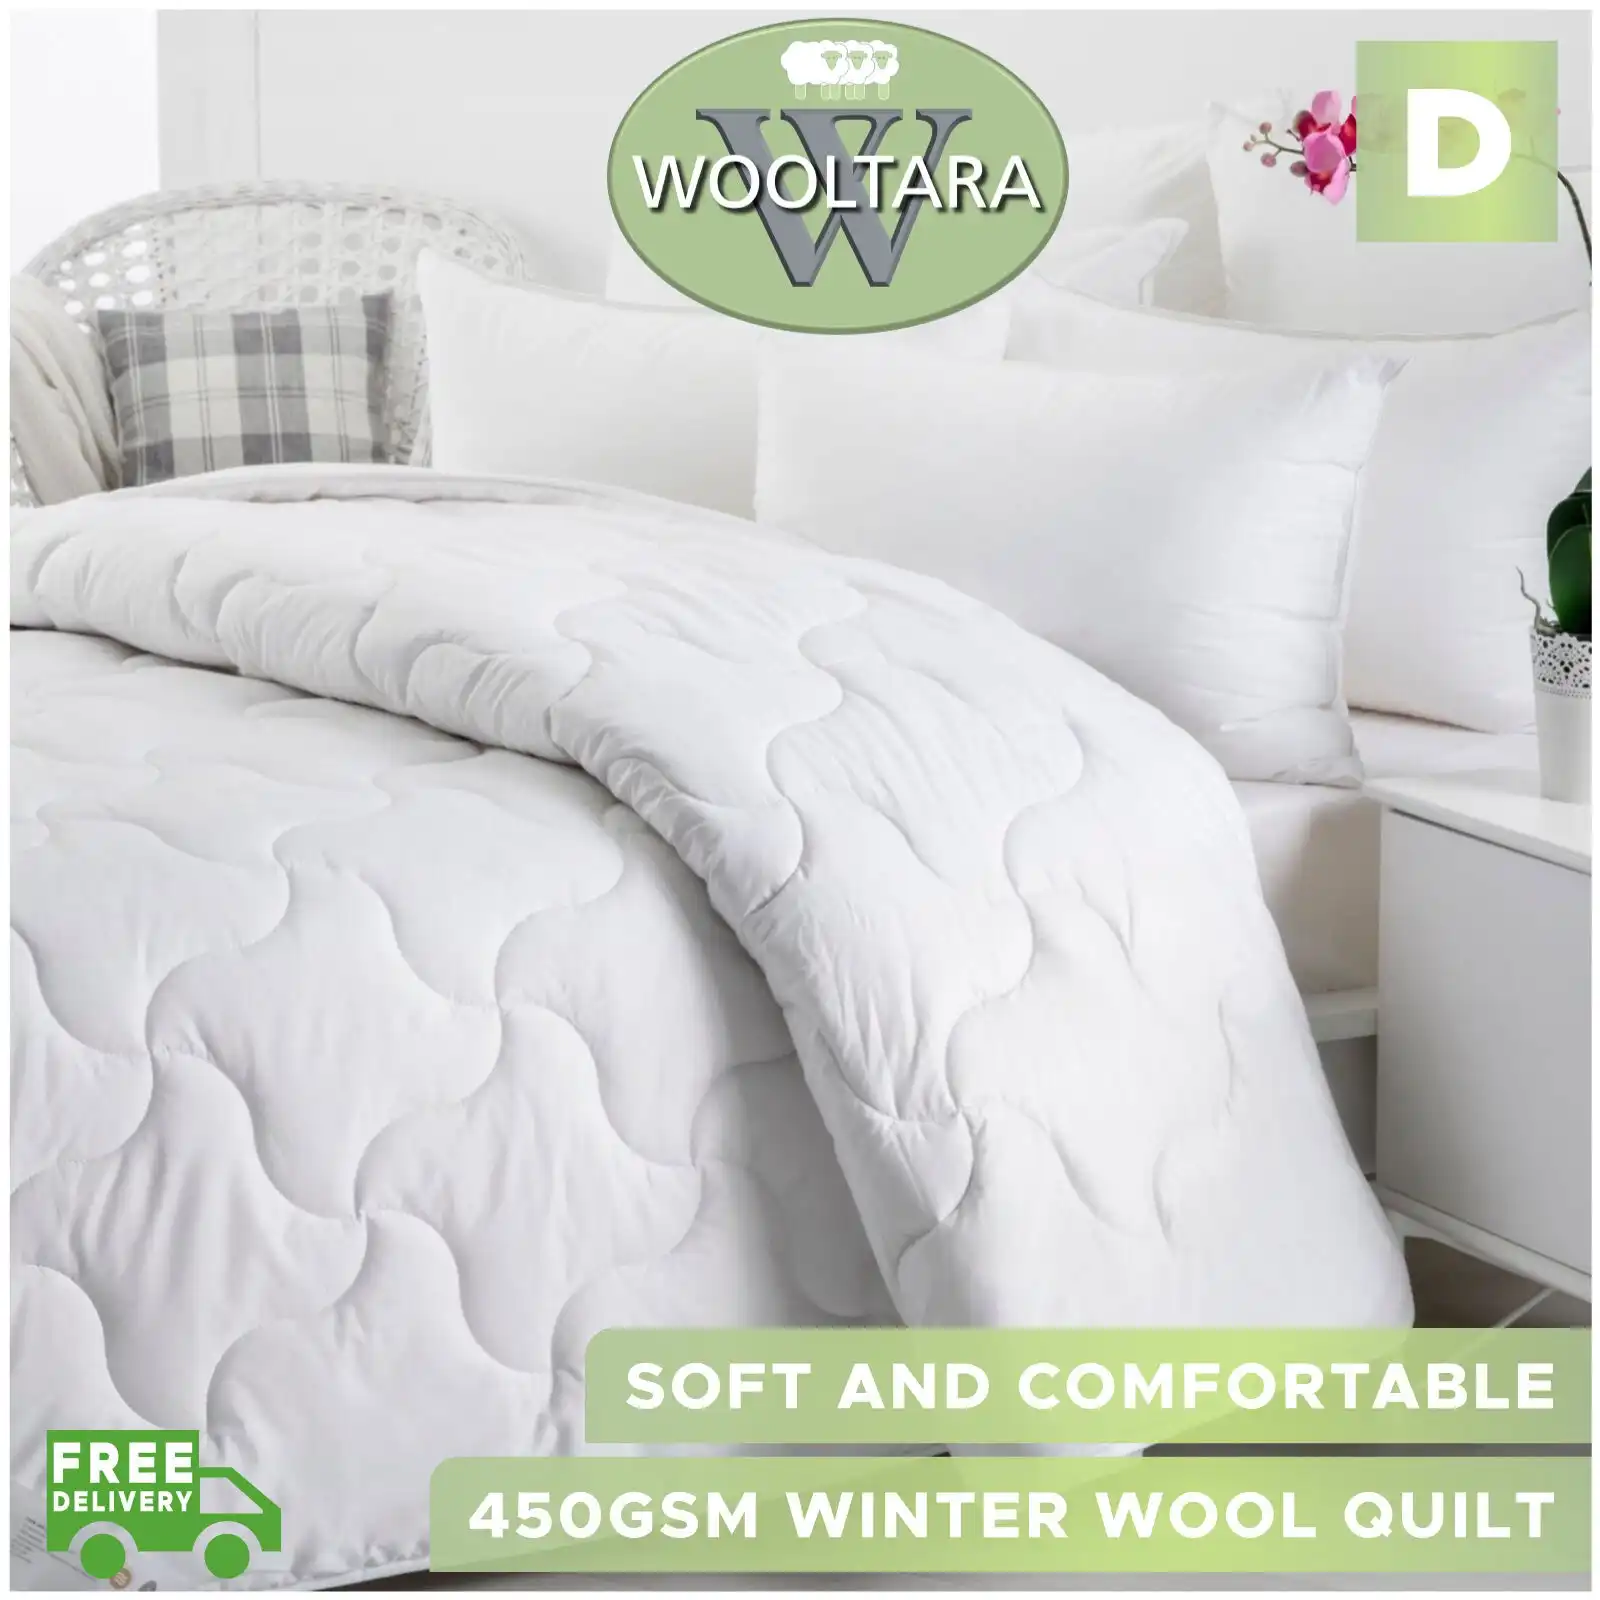 Wooltara Imperial Luxury 450GSM Washable Winter Australia Wool Quilt - Double Bed